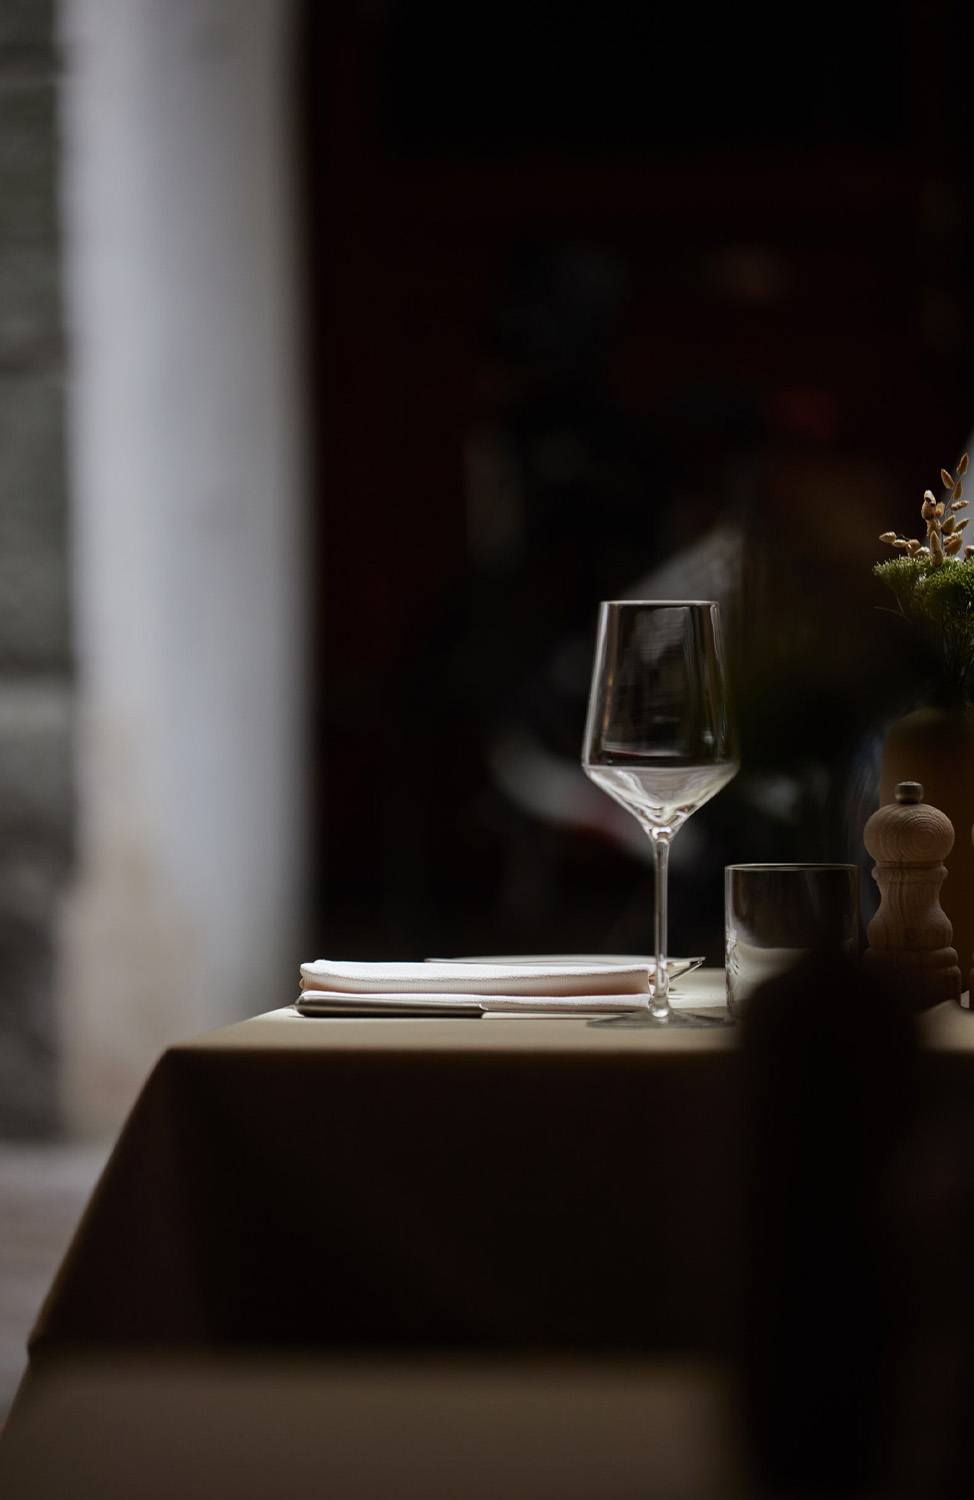 Atmospheric photo of a wine glass on a discreetly set table